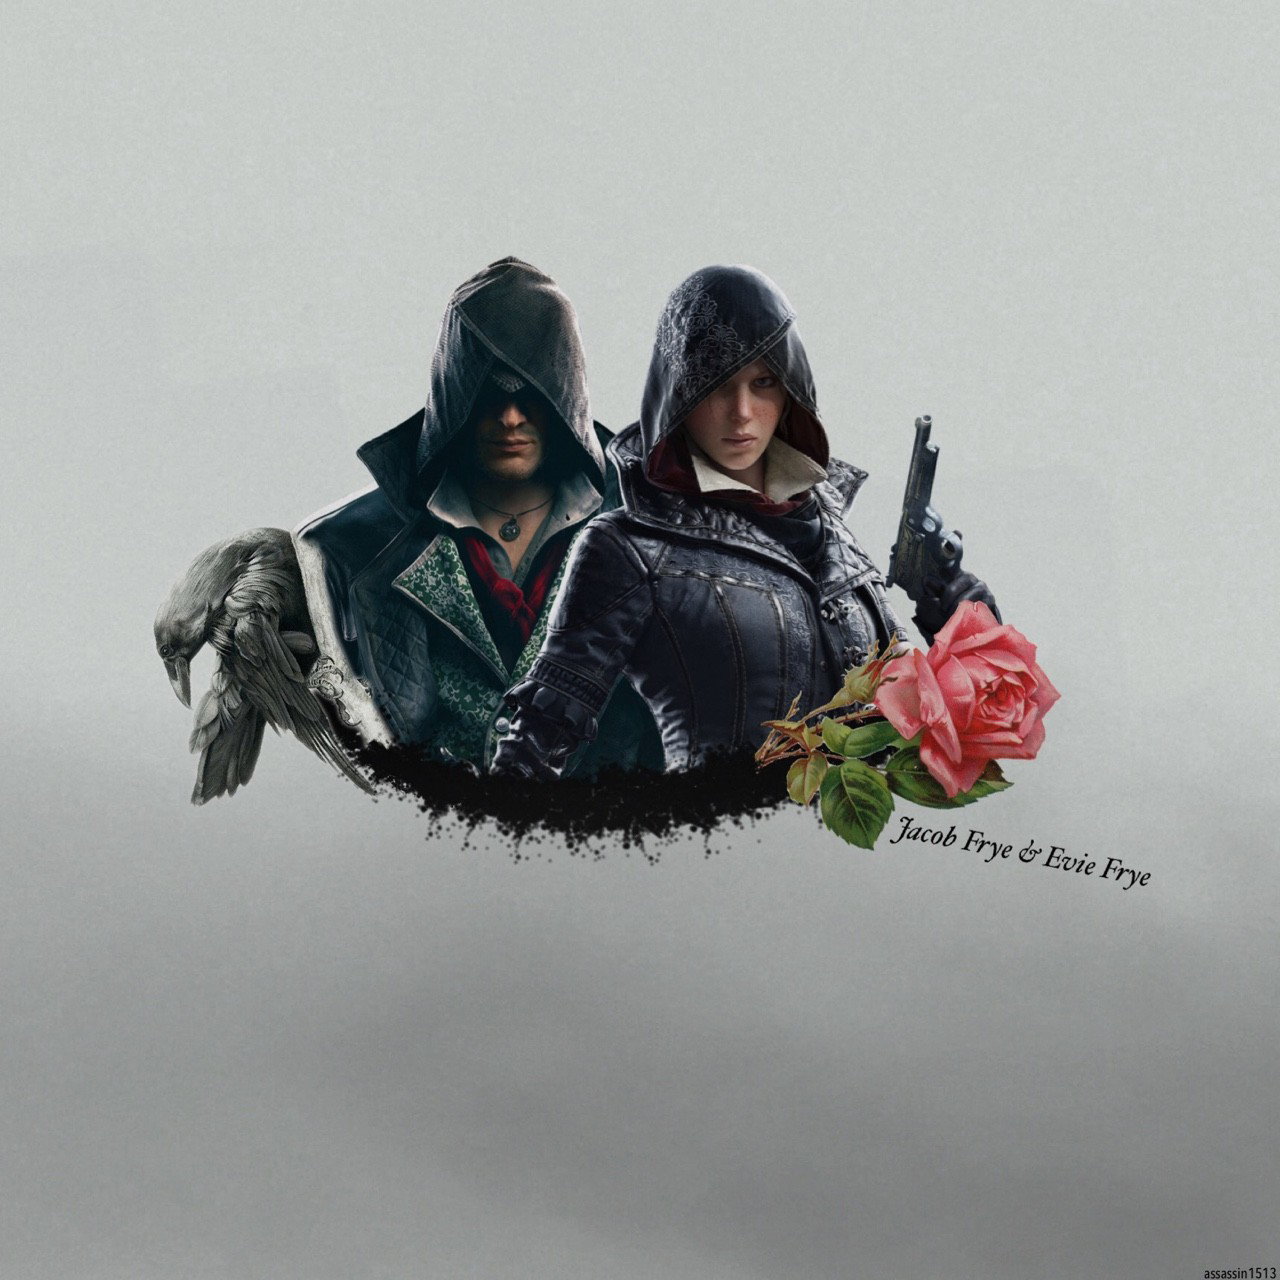 Photo by the5impleton with the username @the5impleton, who is a verified user,  December 14, 2017 at 1:42 AM and the text says 'assassin1513:

|Minimalistic Creed|
|Edits made by me :)| #assassin's  #creed  #syndicate  #assassins  #creed  #syndicate  #assassins  #creed  #unity  #assassins  #creed  #rogue  #assassins  #creed  #assassin's  #creed  #assassins  #creed  #1  #assassins ..'